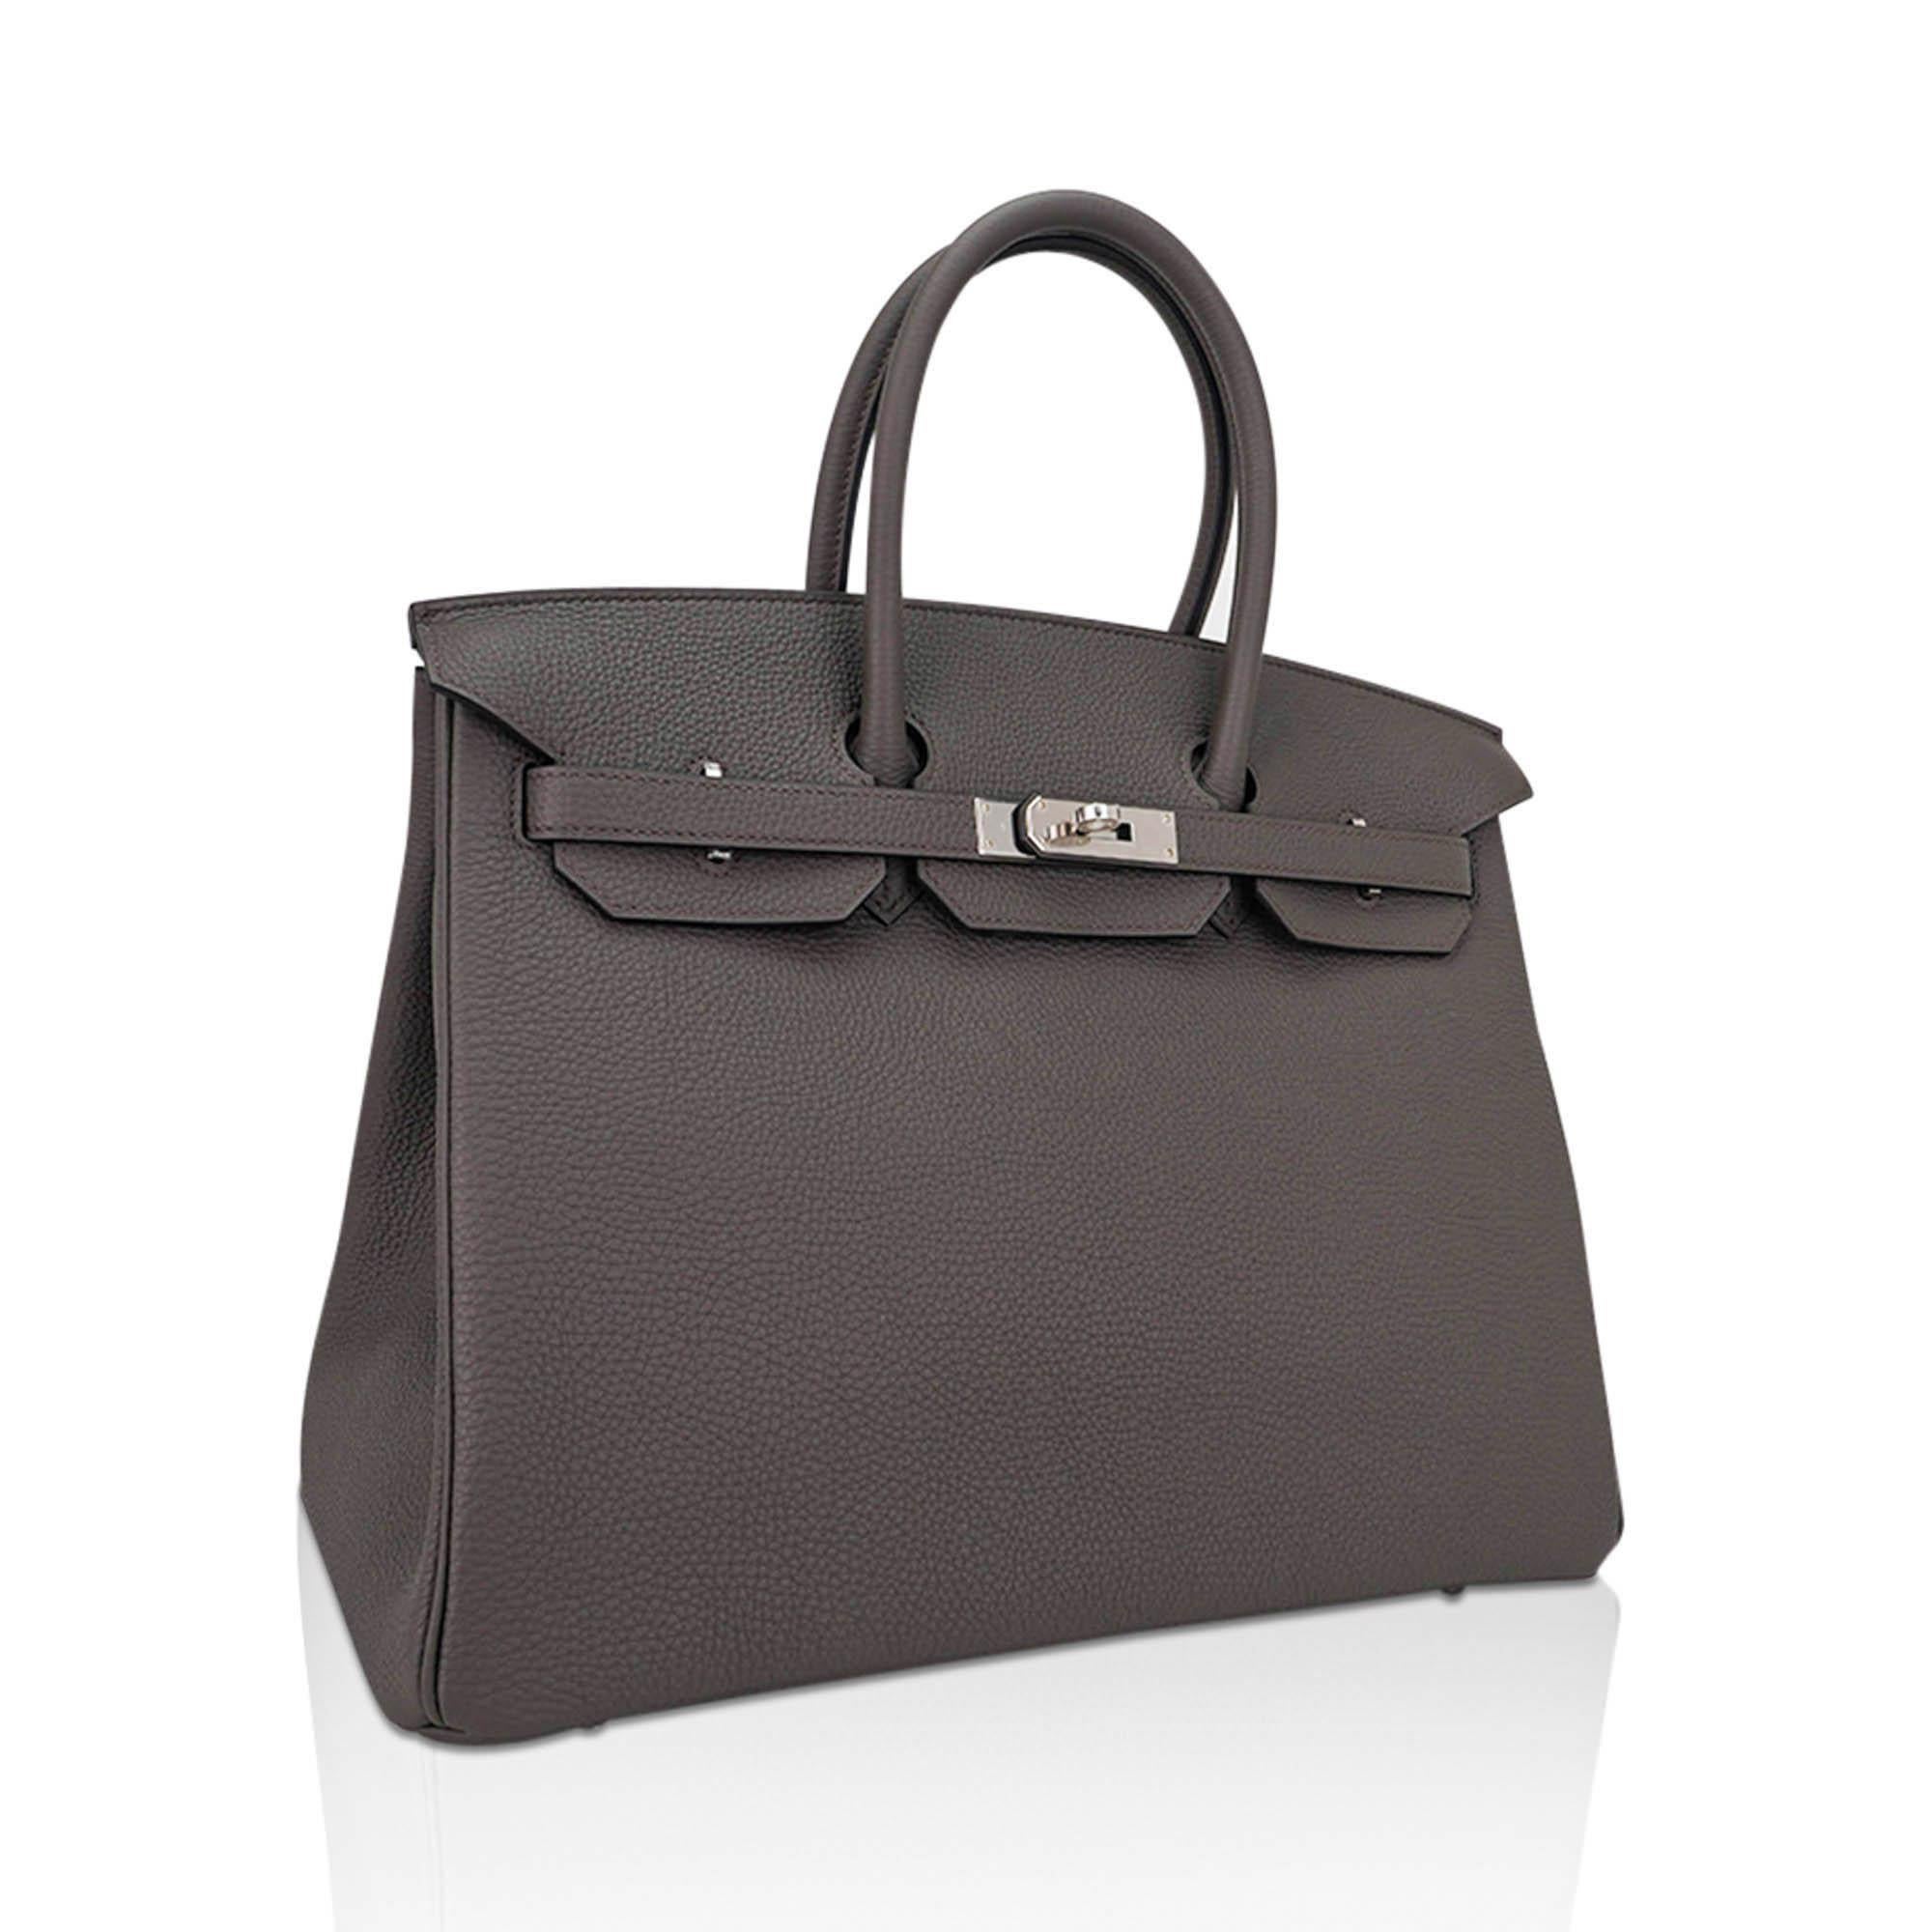 Mightychic offers an Hermes Birkin 35 Etain bag is the most perfect medium gray and is utterly neutral. 
This beauty is absolutely stunning with palladium hardware. 
Clemence leather is textured and highly scratch resistant.
Comes with lock, keys,